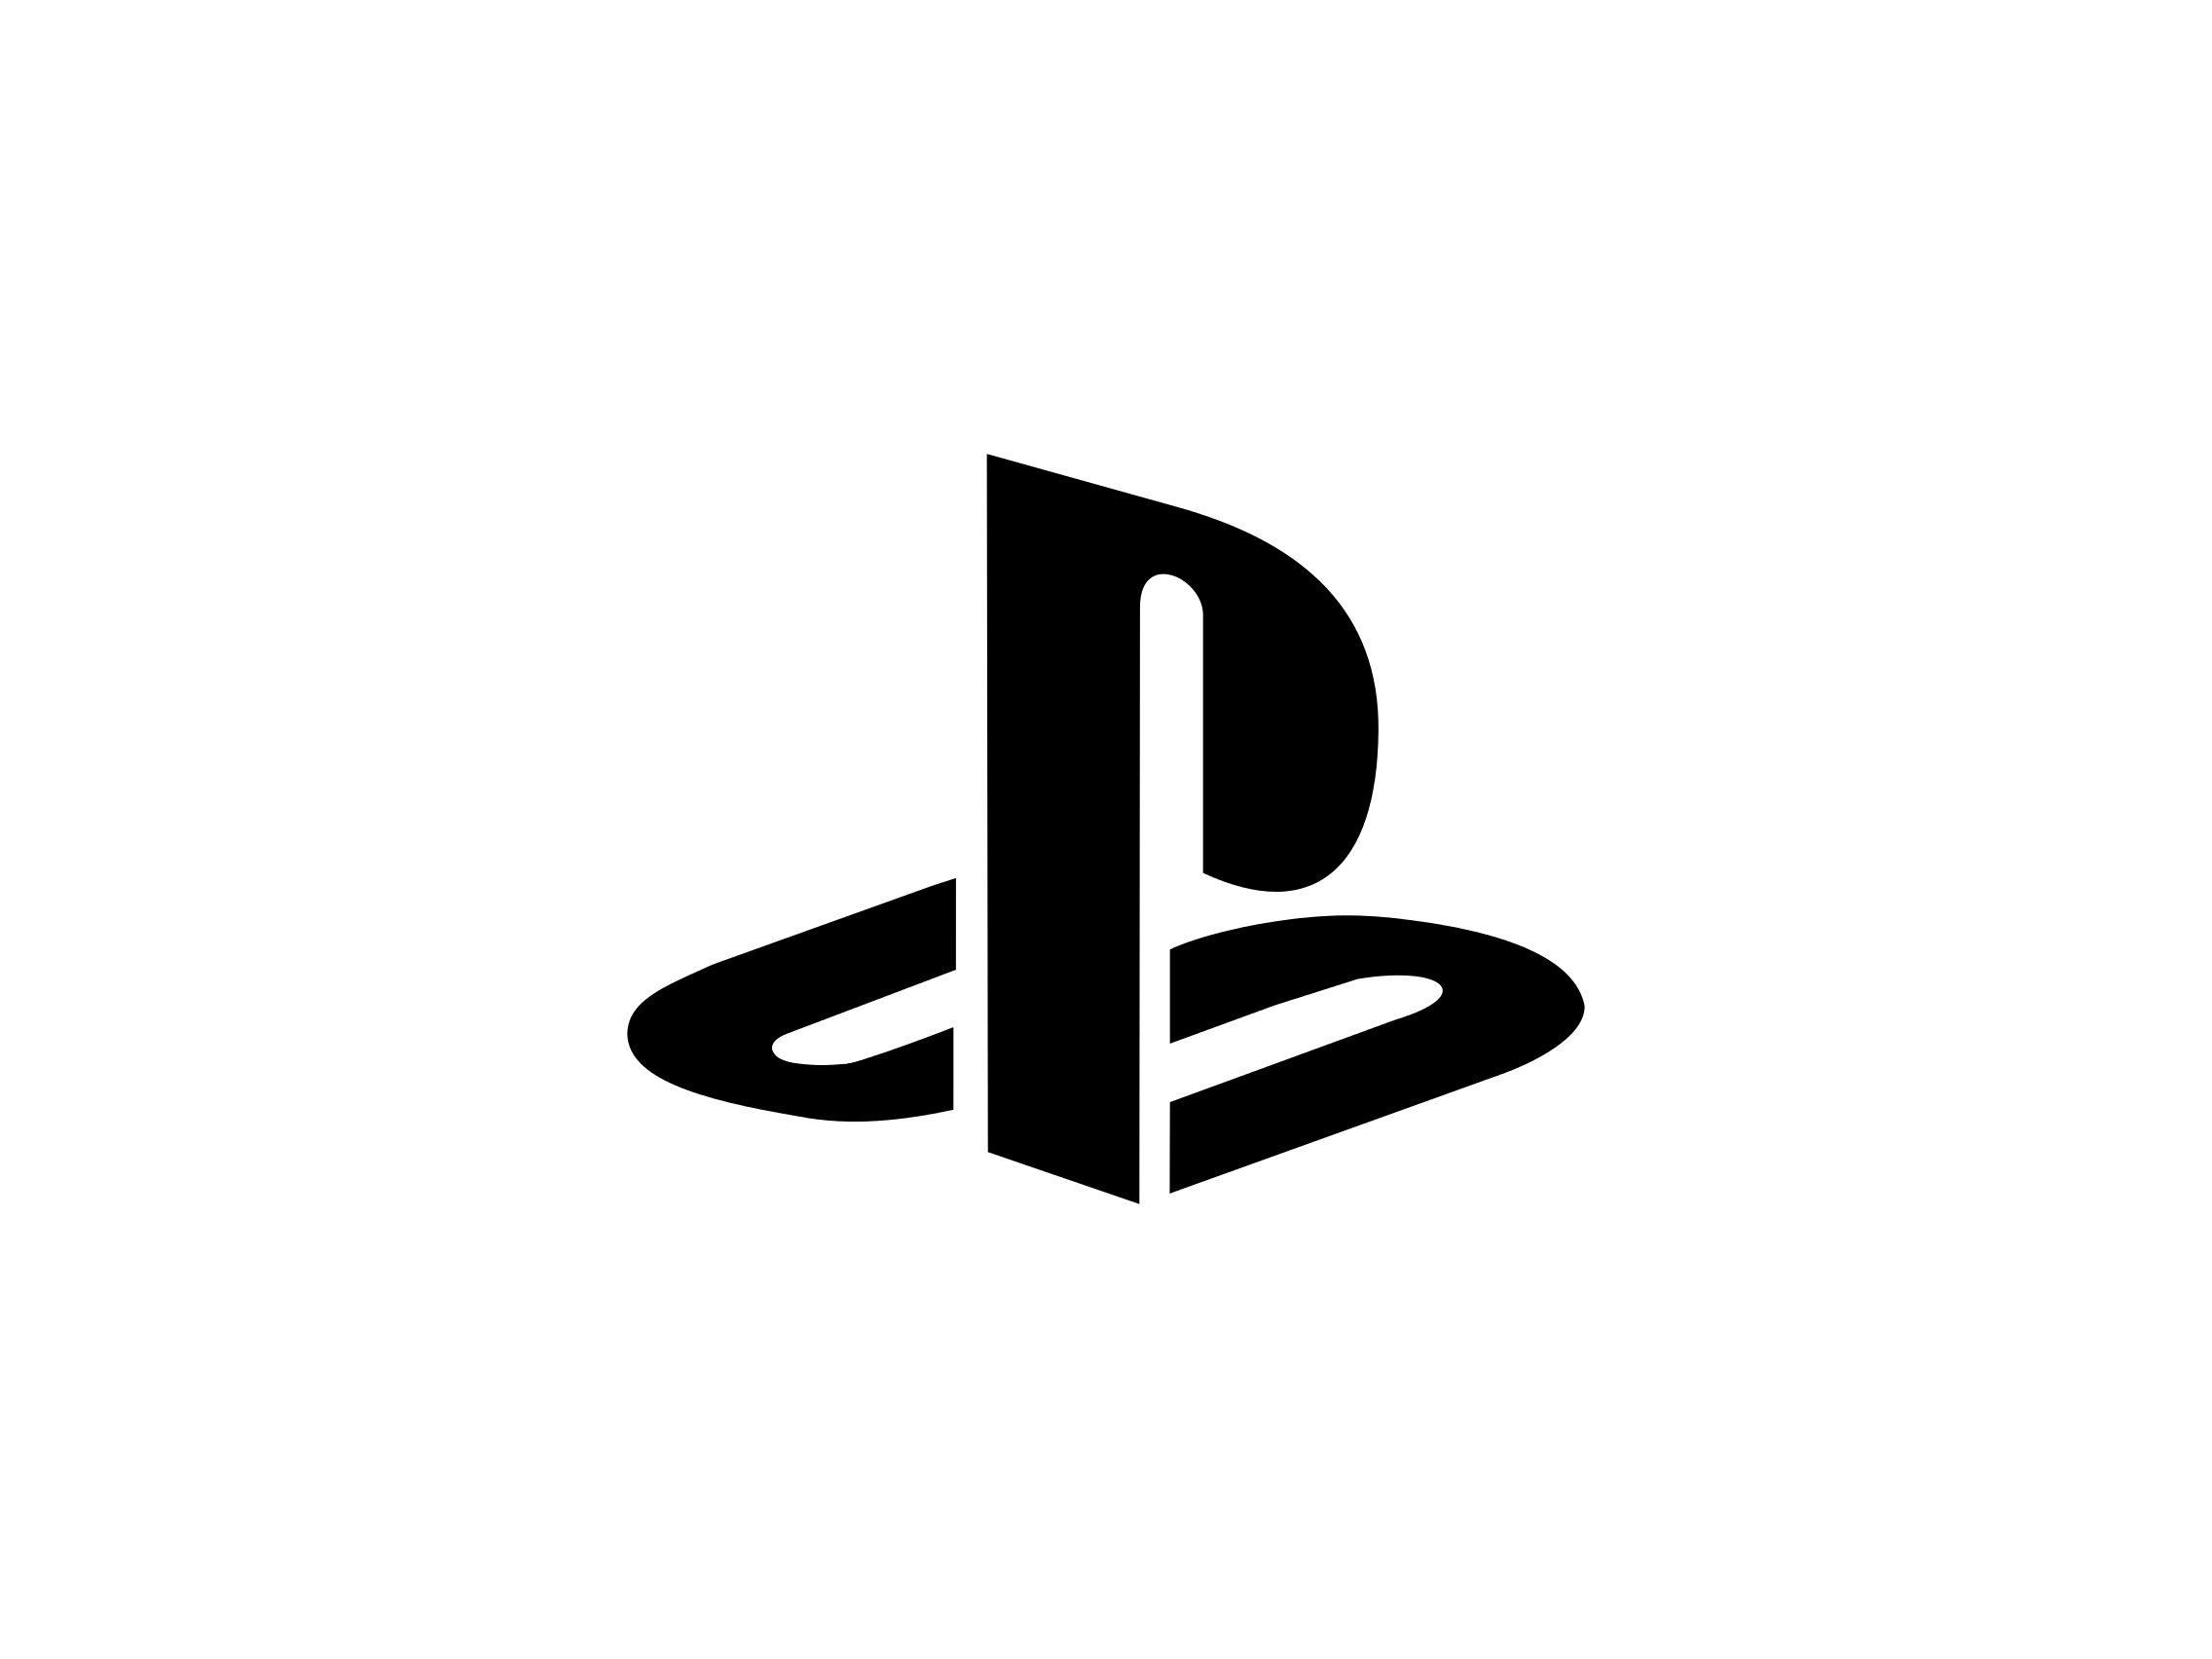 Sony PlayStation Logo - The iconic PlayStation logo was created in 1994